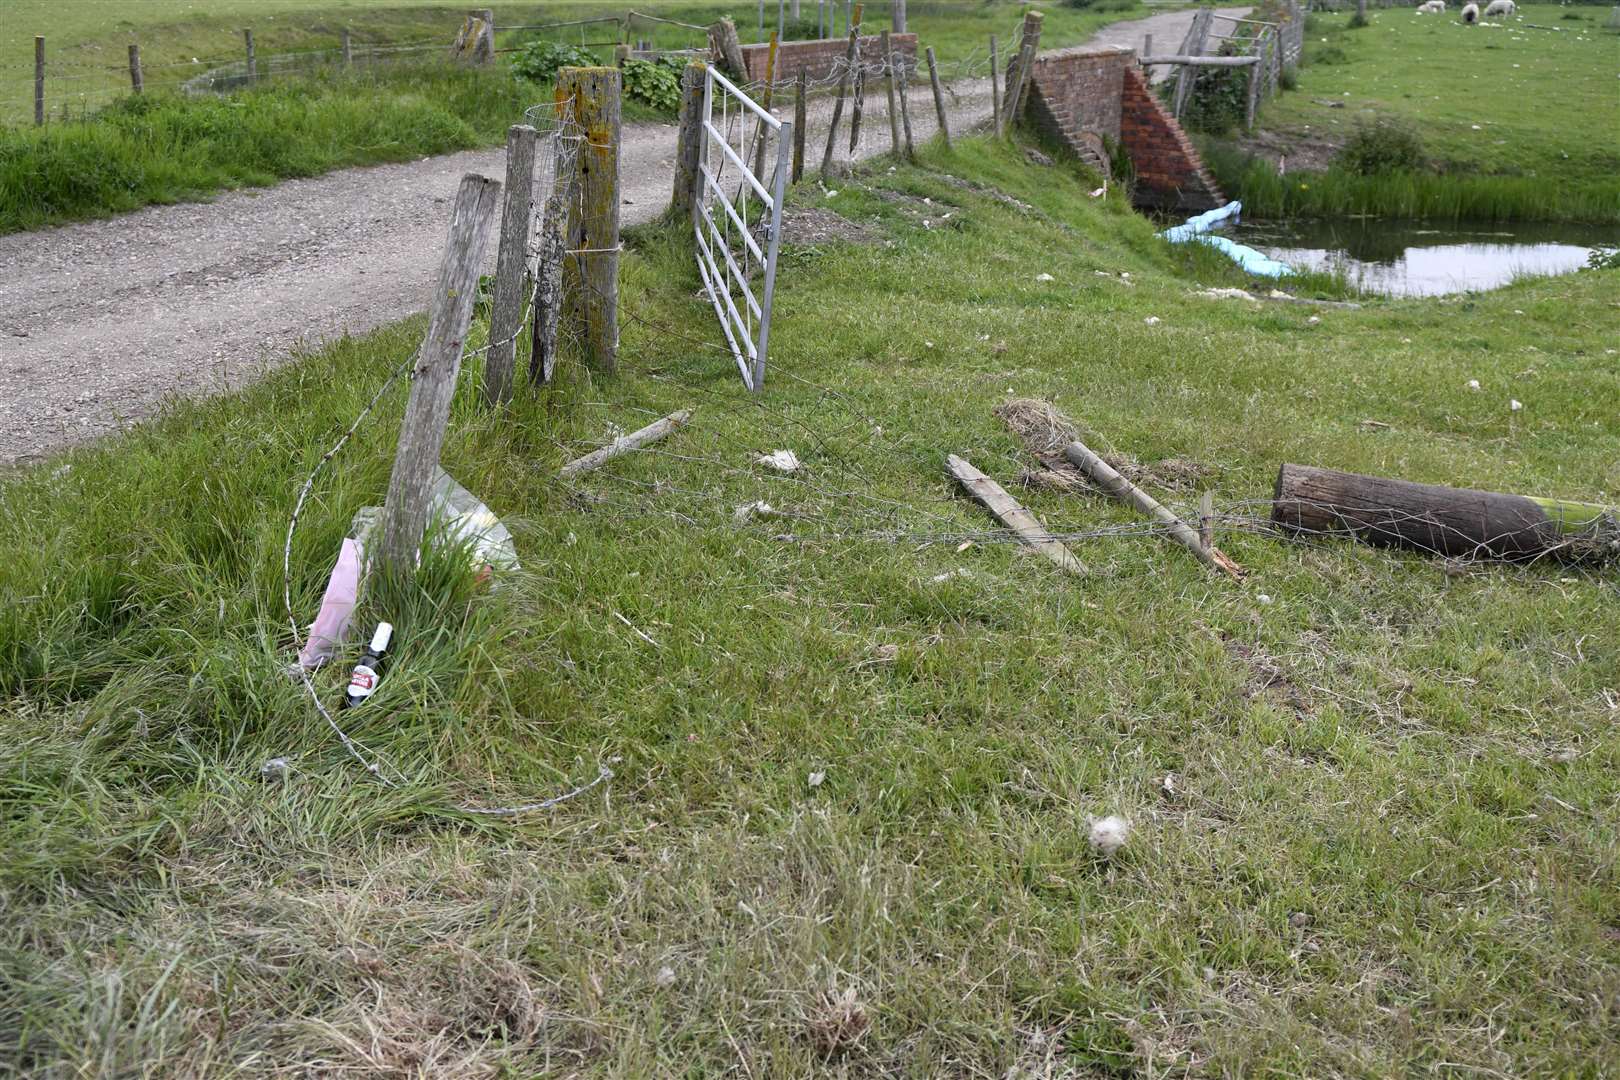 The fence that the car went through during the crash. Picture: Barry Goodwin